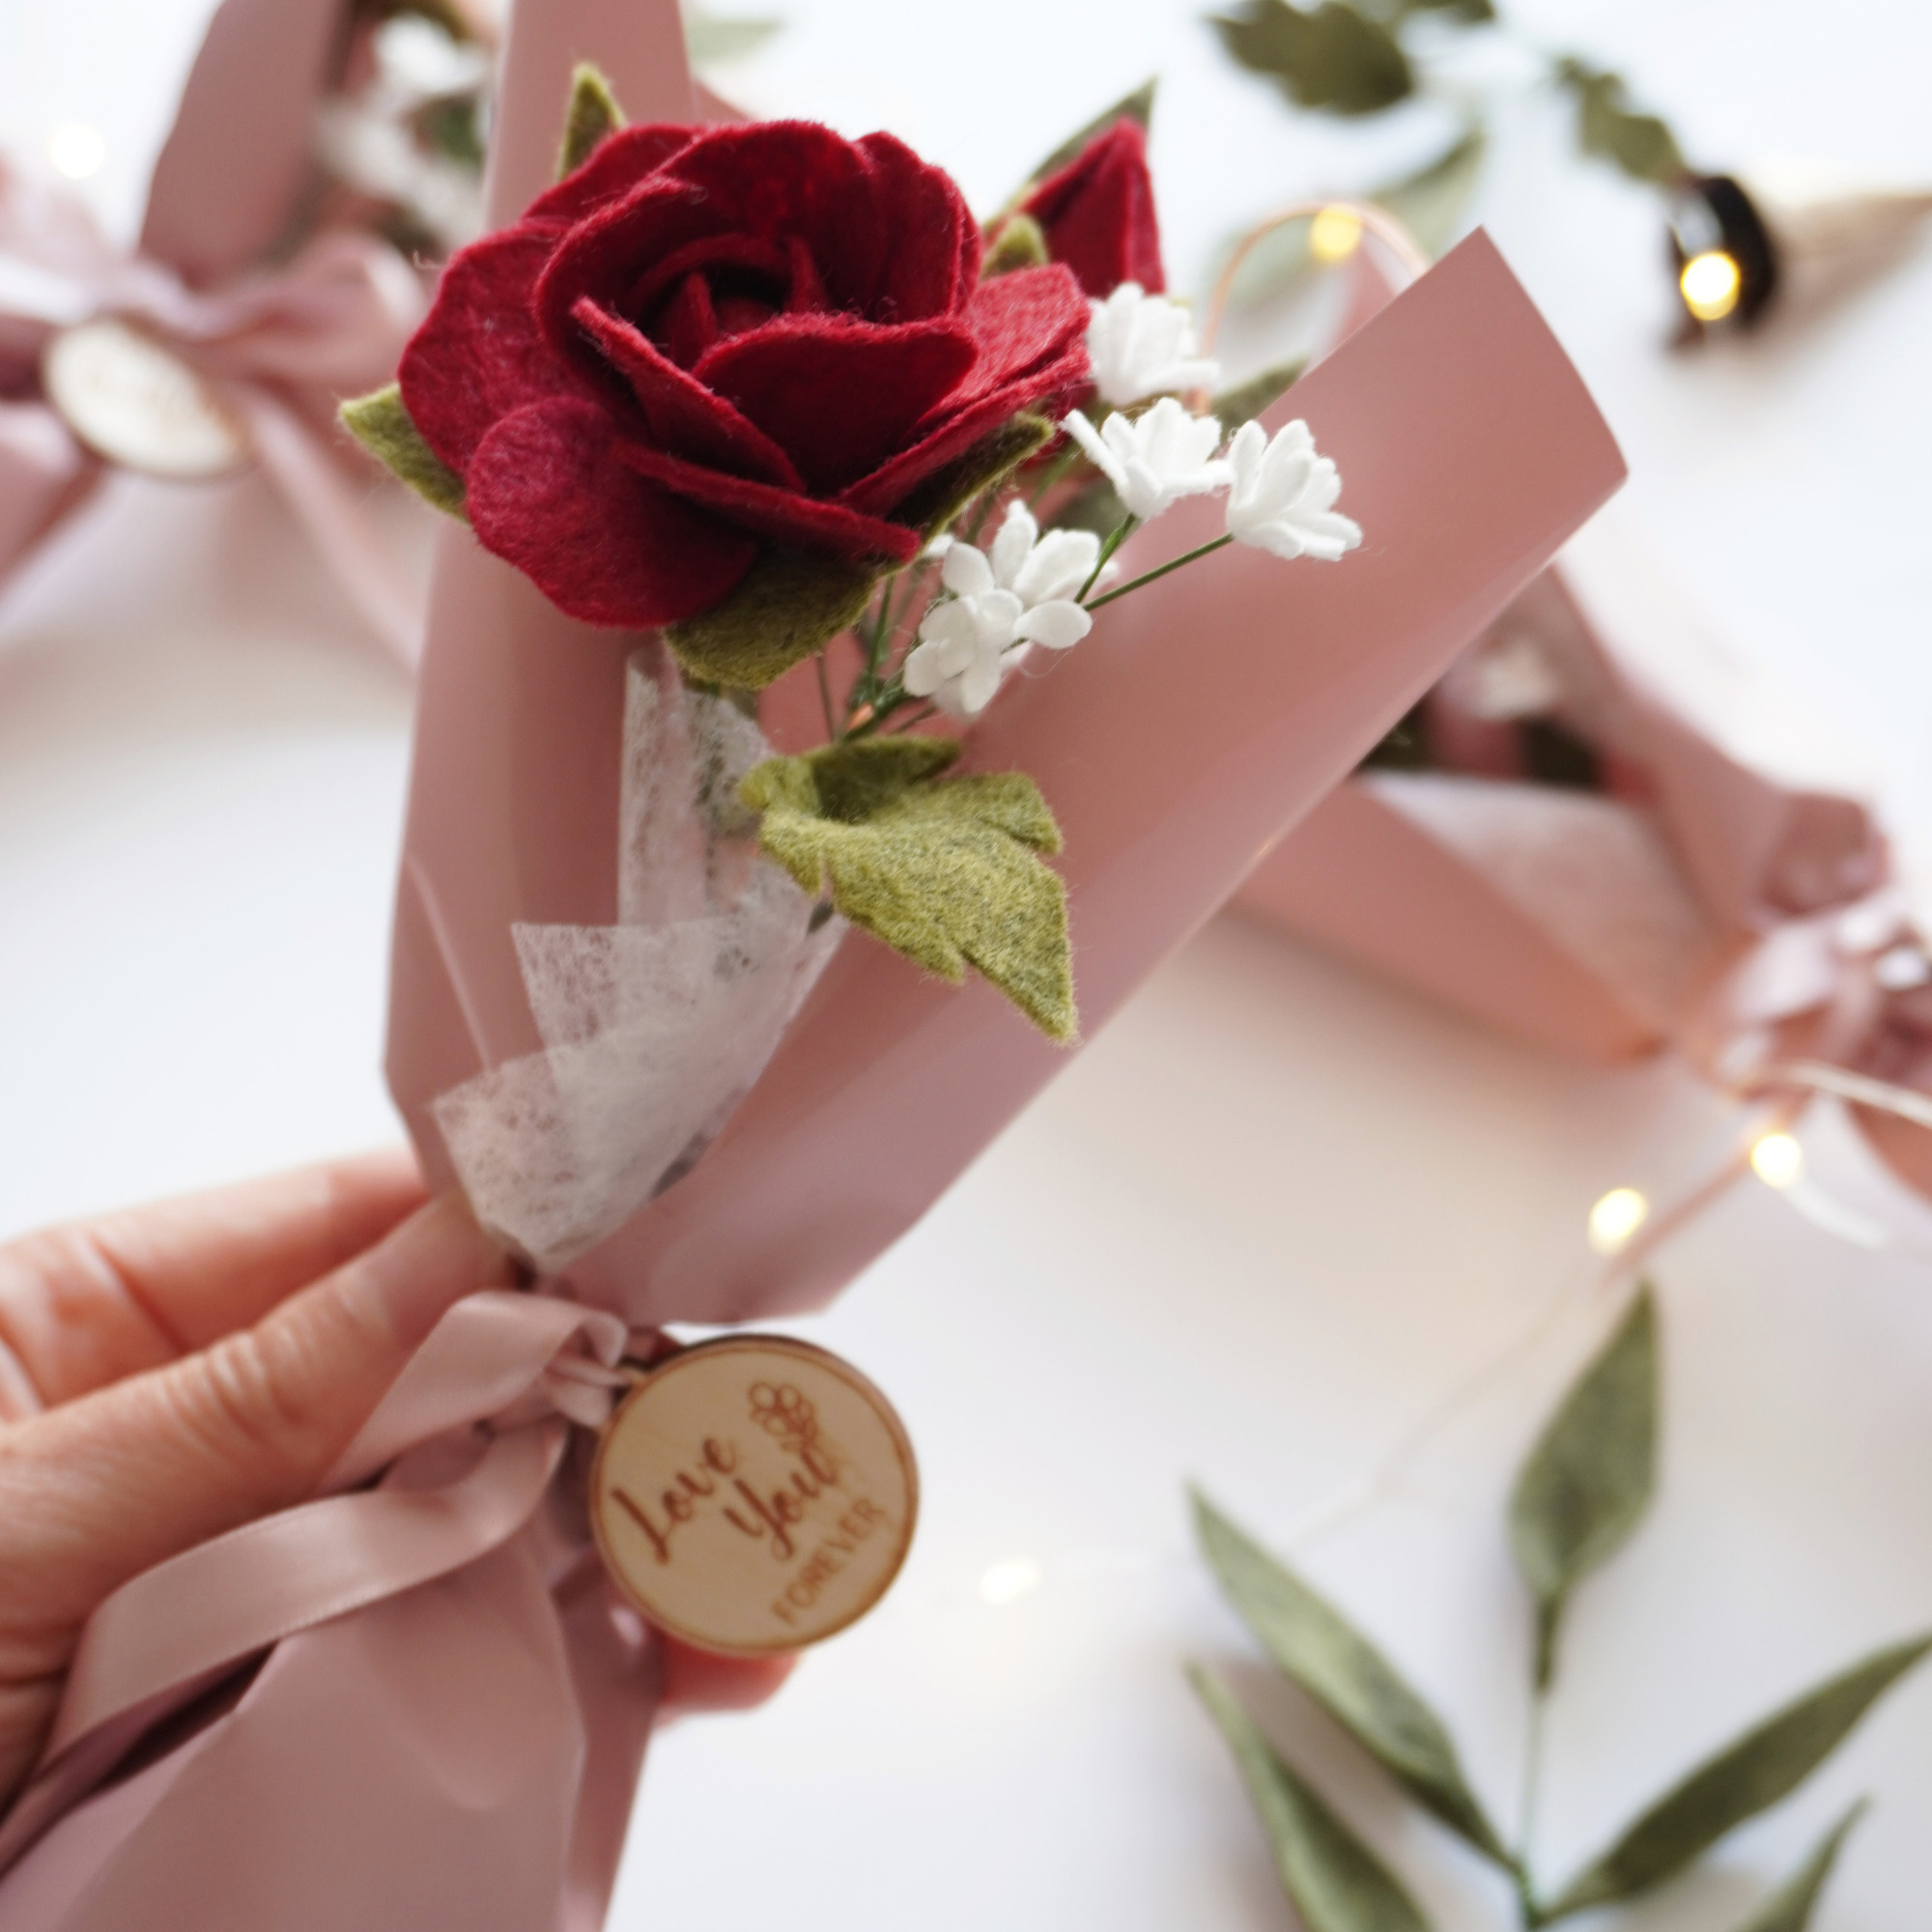 Mini rose bouquet with baby's breath wooden tag